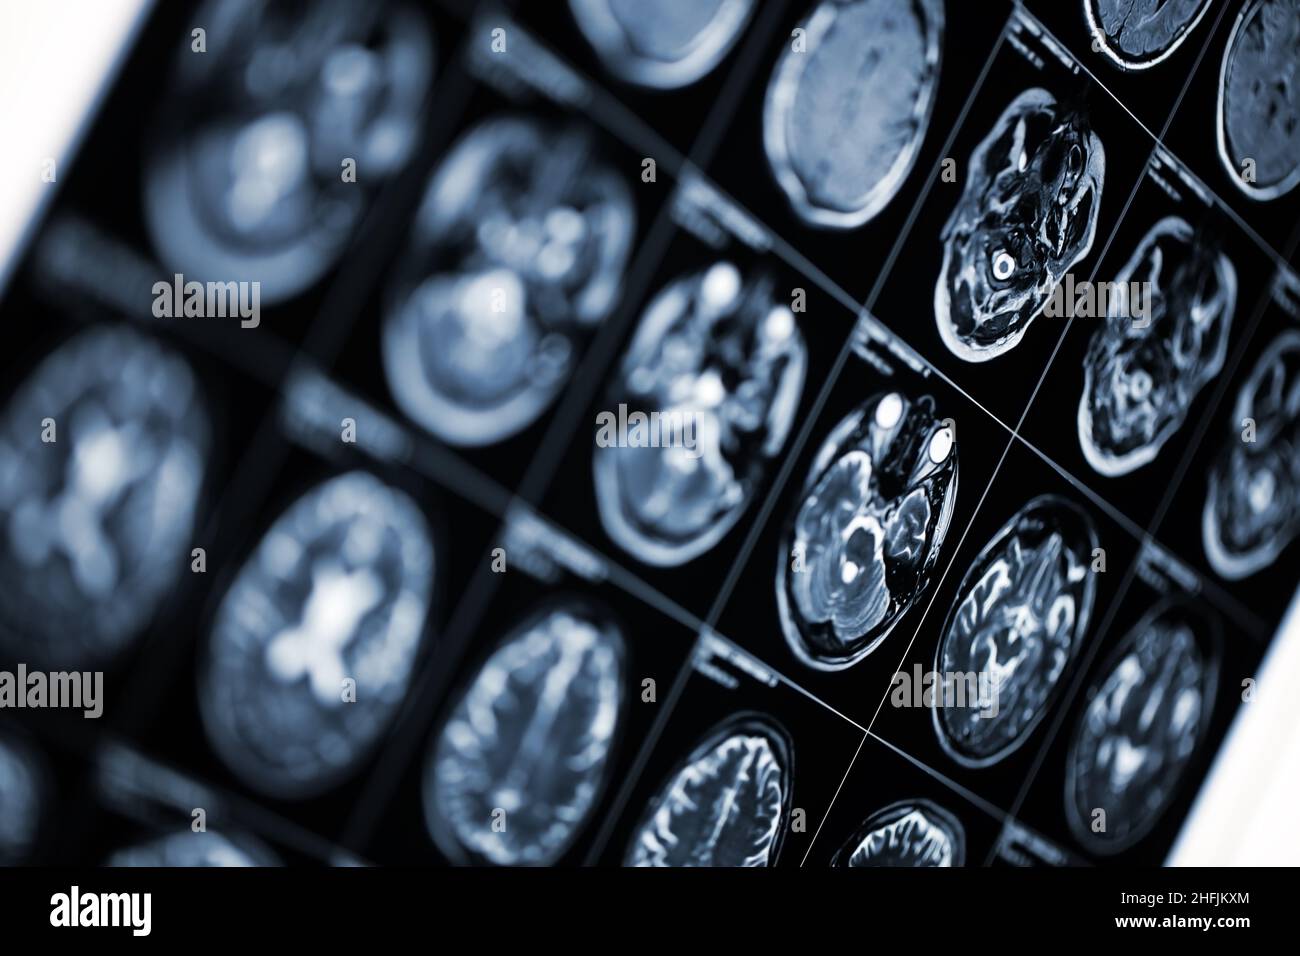 Medical background with MRI scan image of human head. Stock Photo